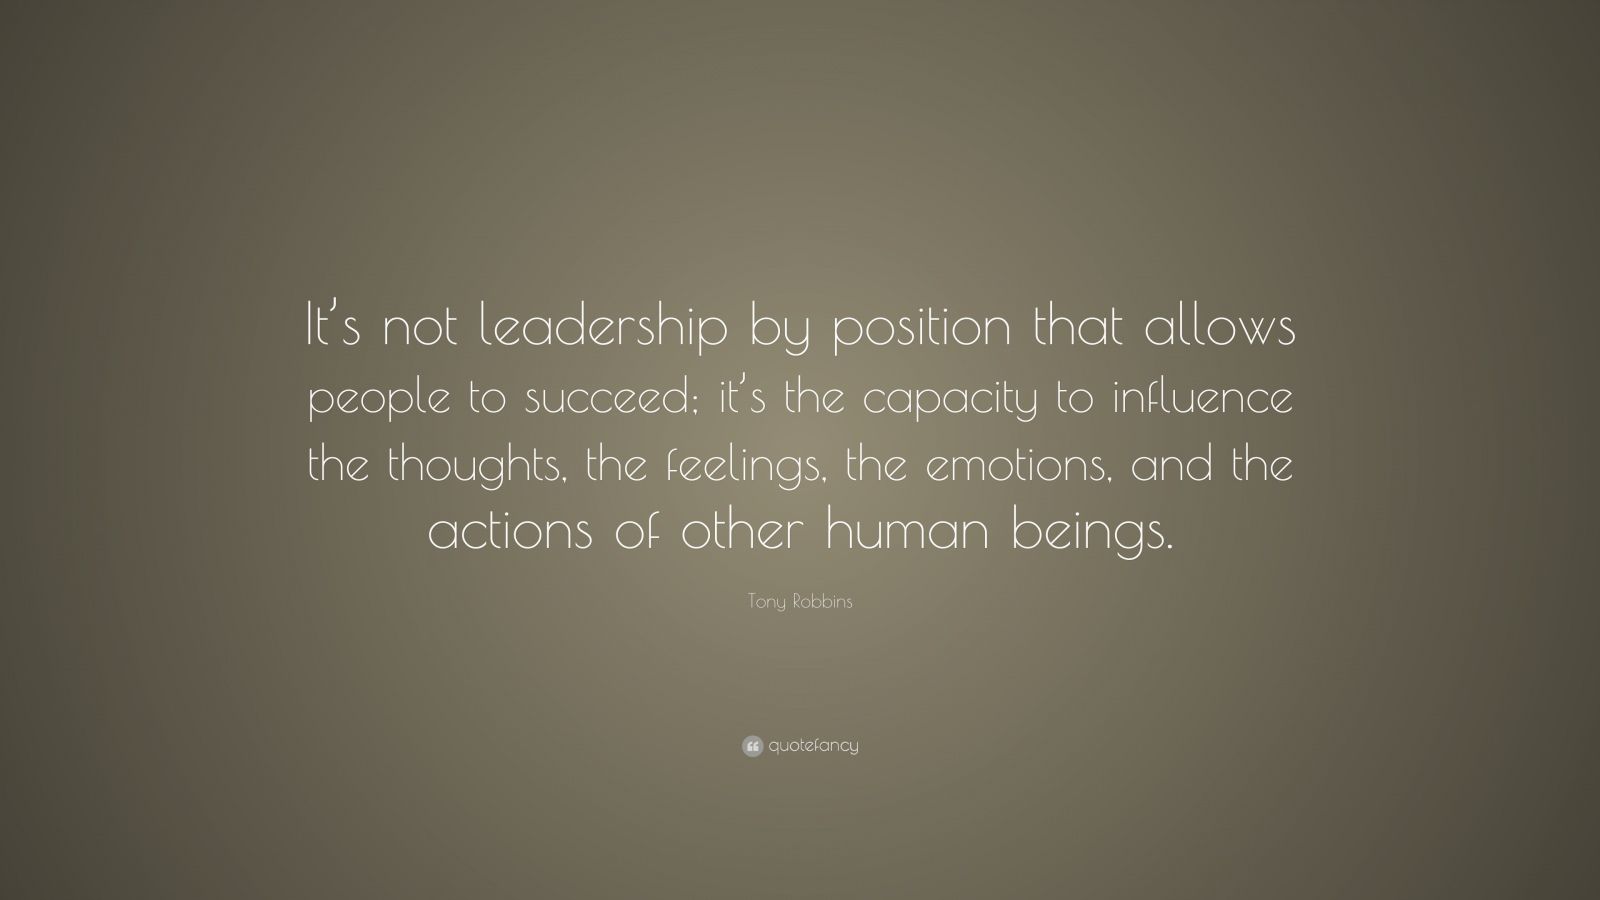 Tony Robbins Quote: “It’s not leadership by position that allows people ...